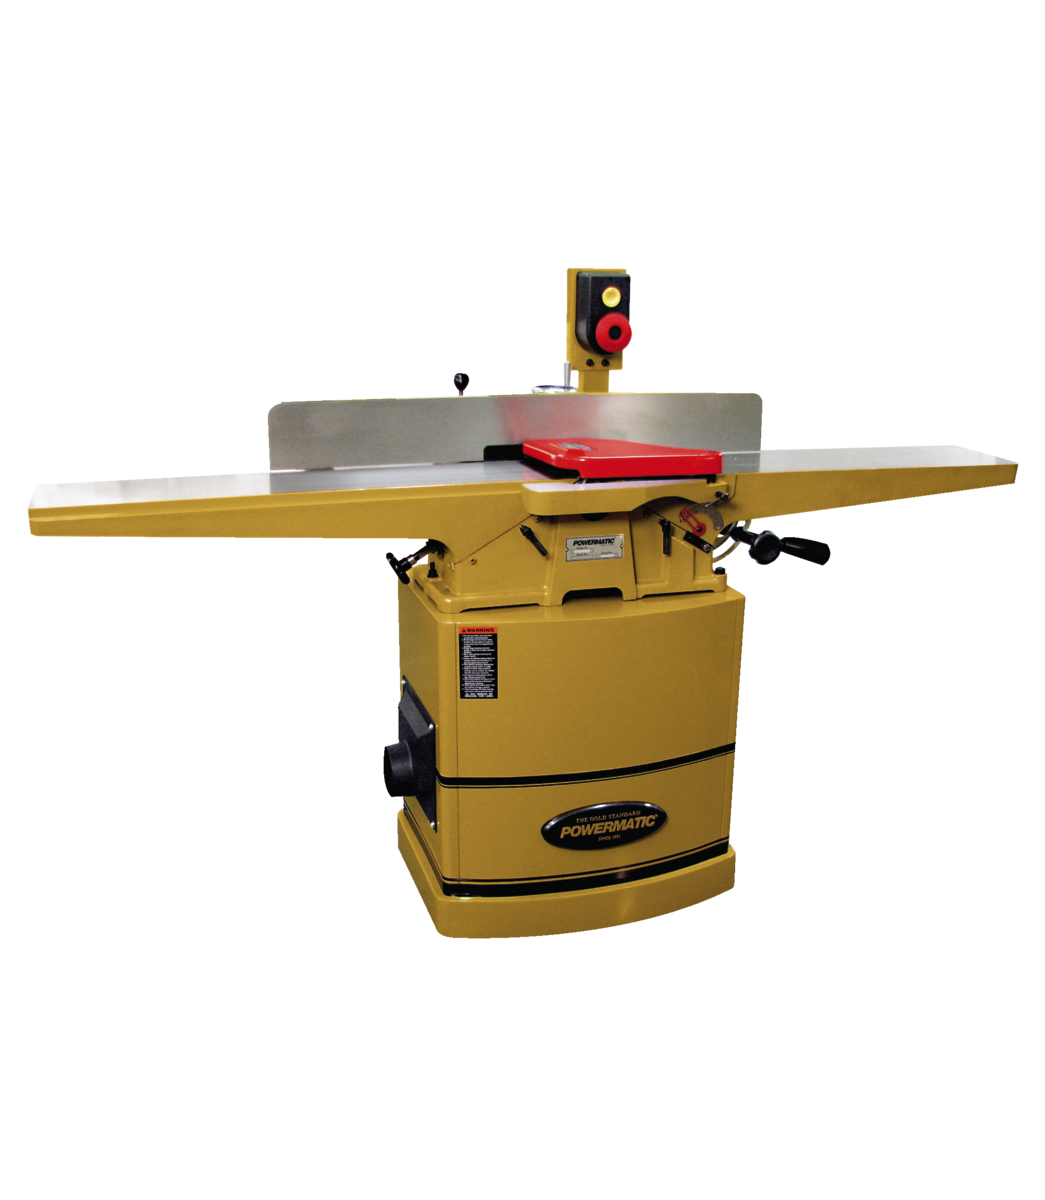 Powermatic 60HH 8 Inch Helical Head Jointer Image